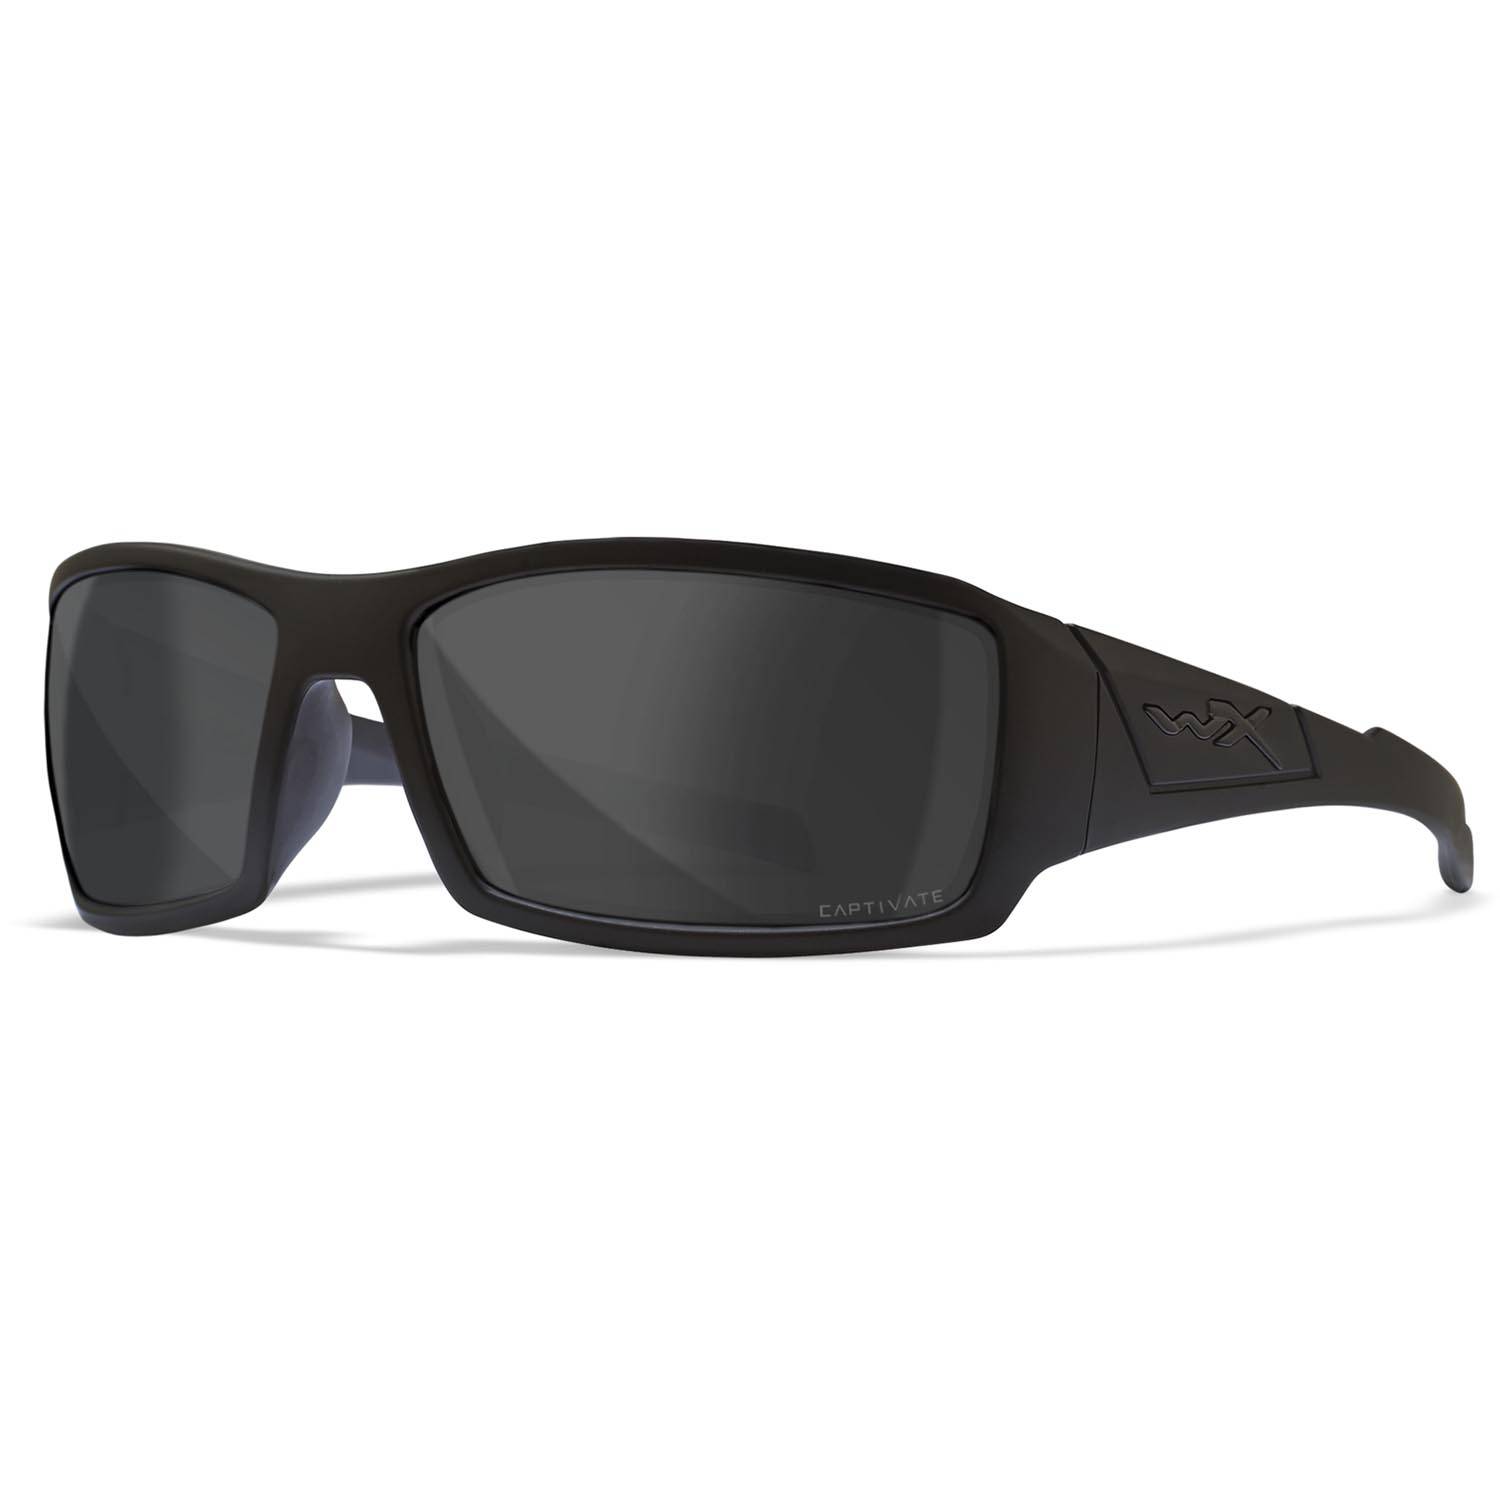 WILEY X WX TWISTED TACTICAL SUNGLASSES